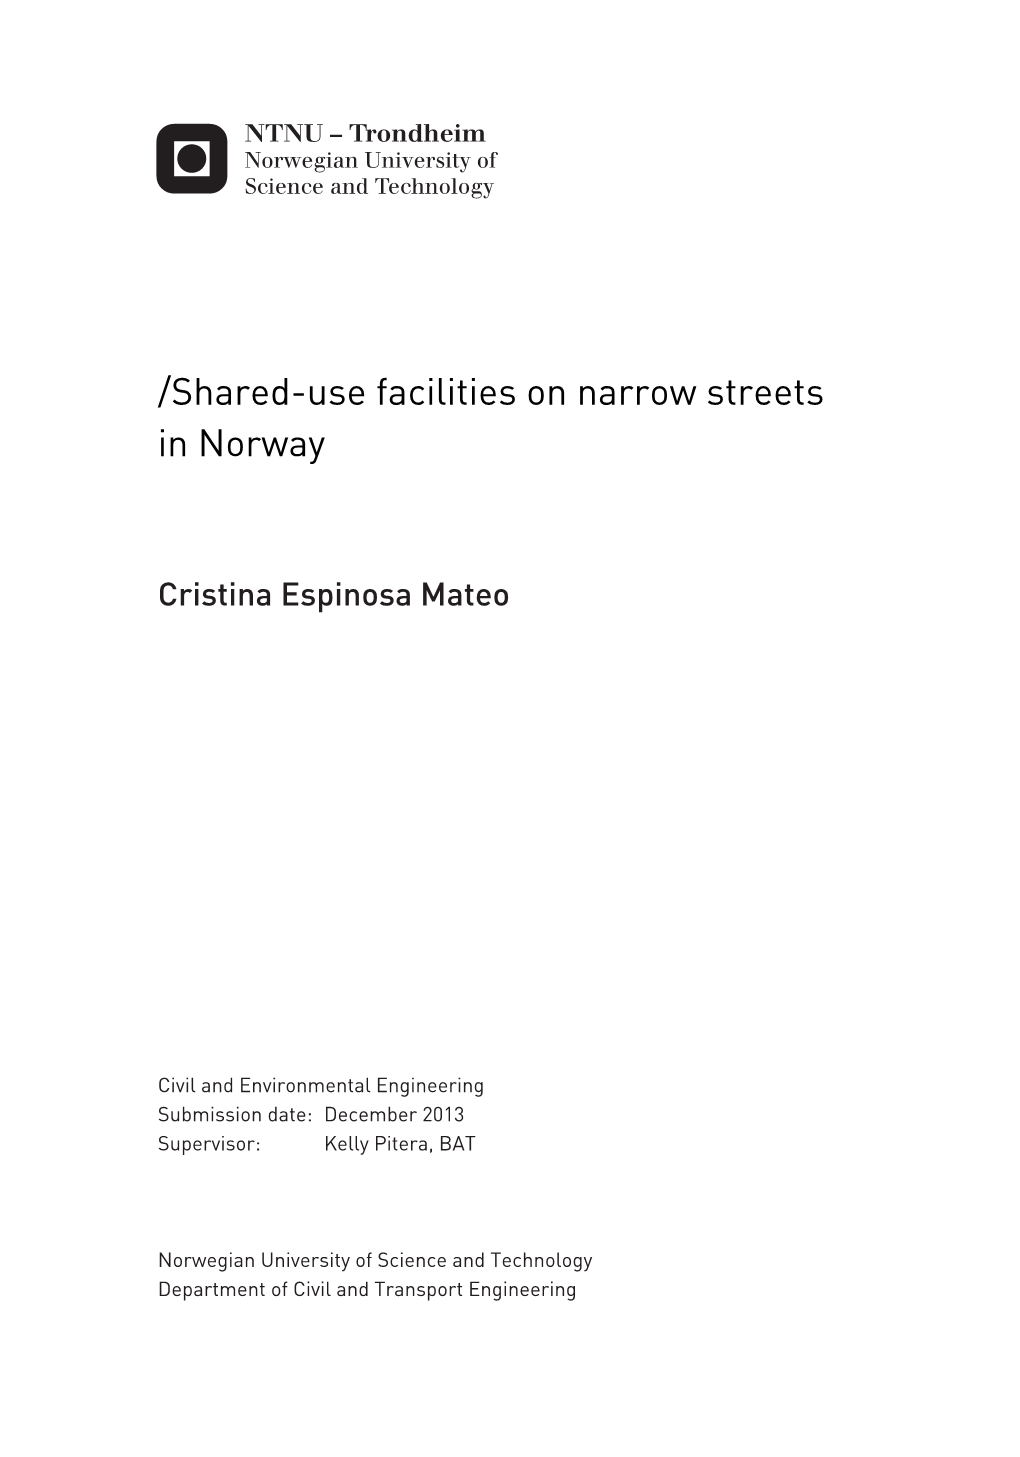 Shared-Use Facilities on Narrow Streets in Norway